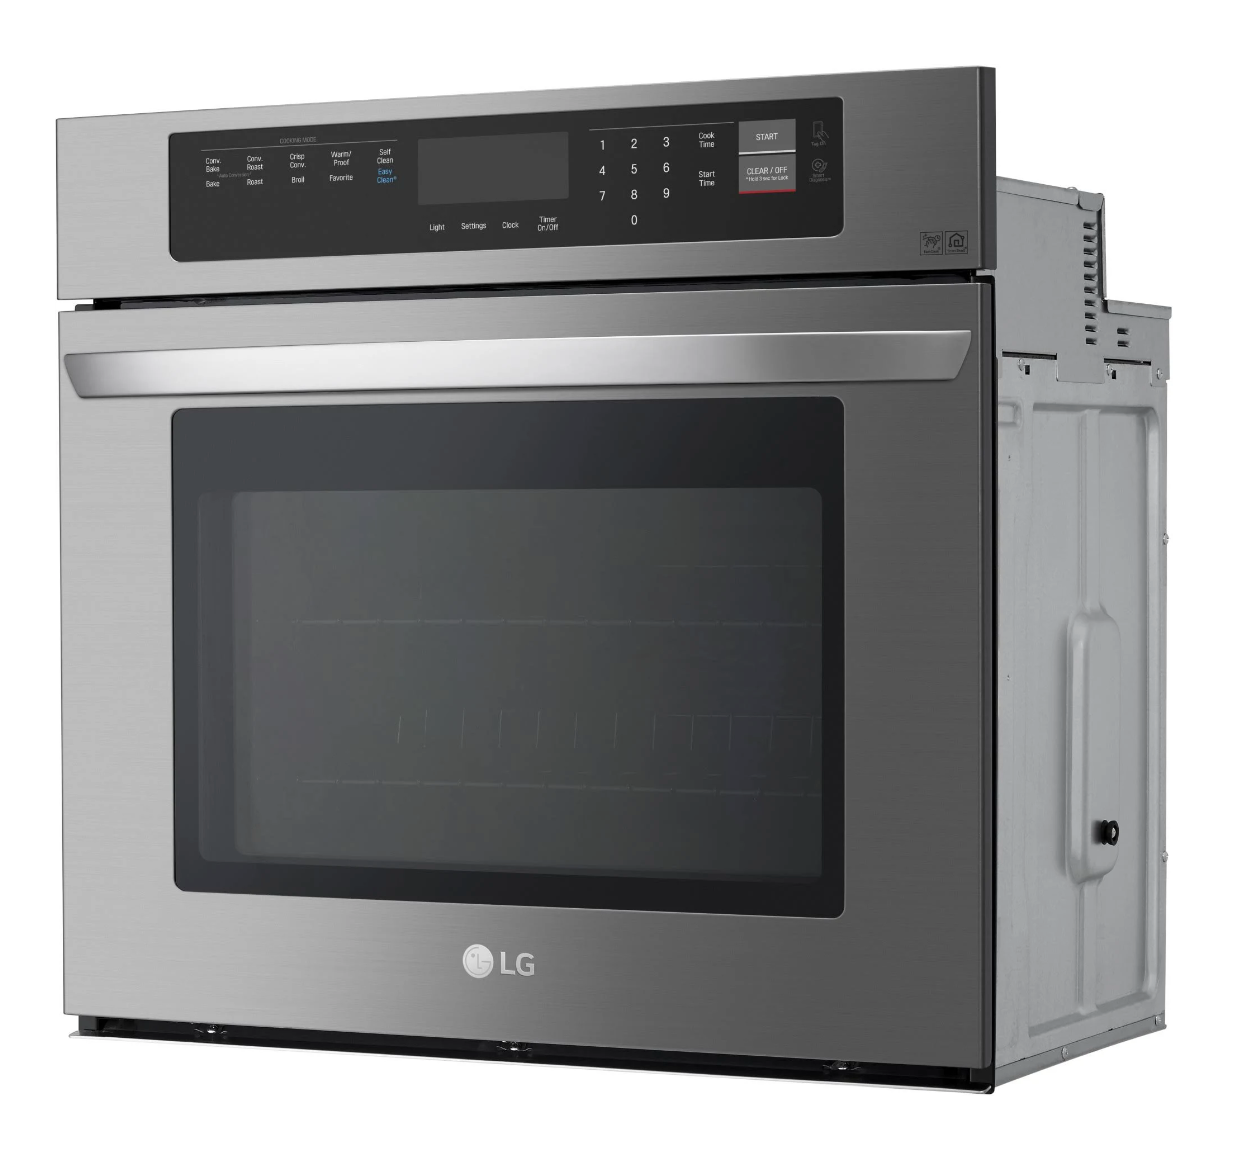 LG 30 Inch Single Electric Wall Oven LWS3063ST,Convection,Favorites EasyClean,4.7 Cu. Ft. Capacity,NFC Tag On Technology, 12 HR Automatic Shut-Off,Brilliant Blue Interior,Broiler Pan,Stainless Steel,New,888429